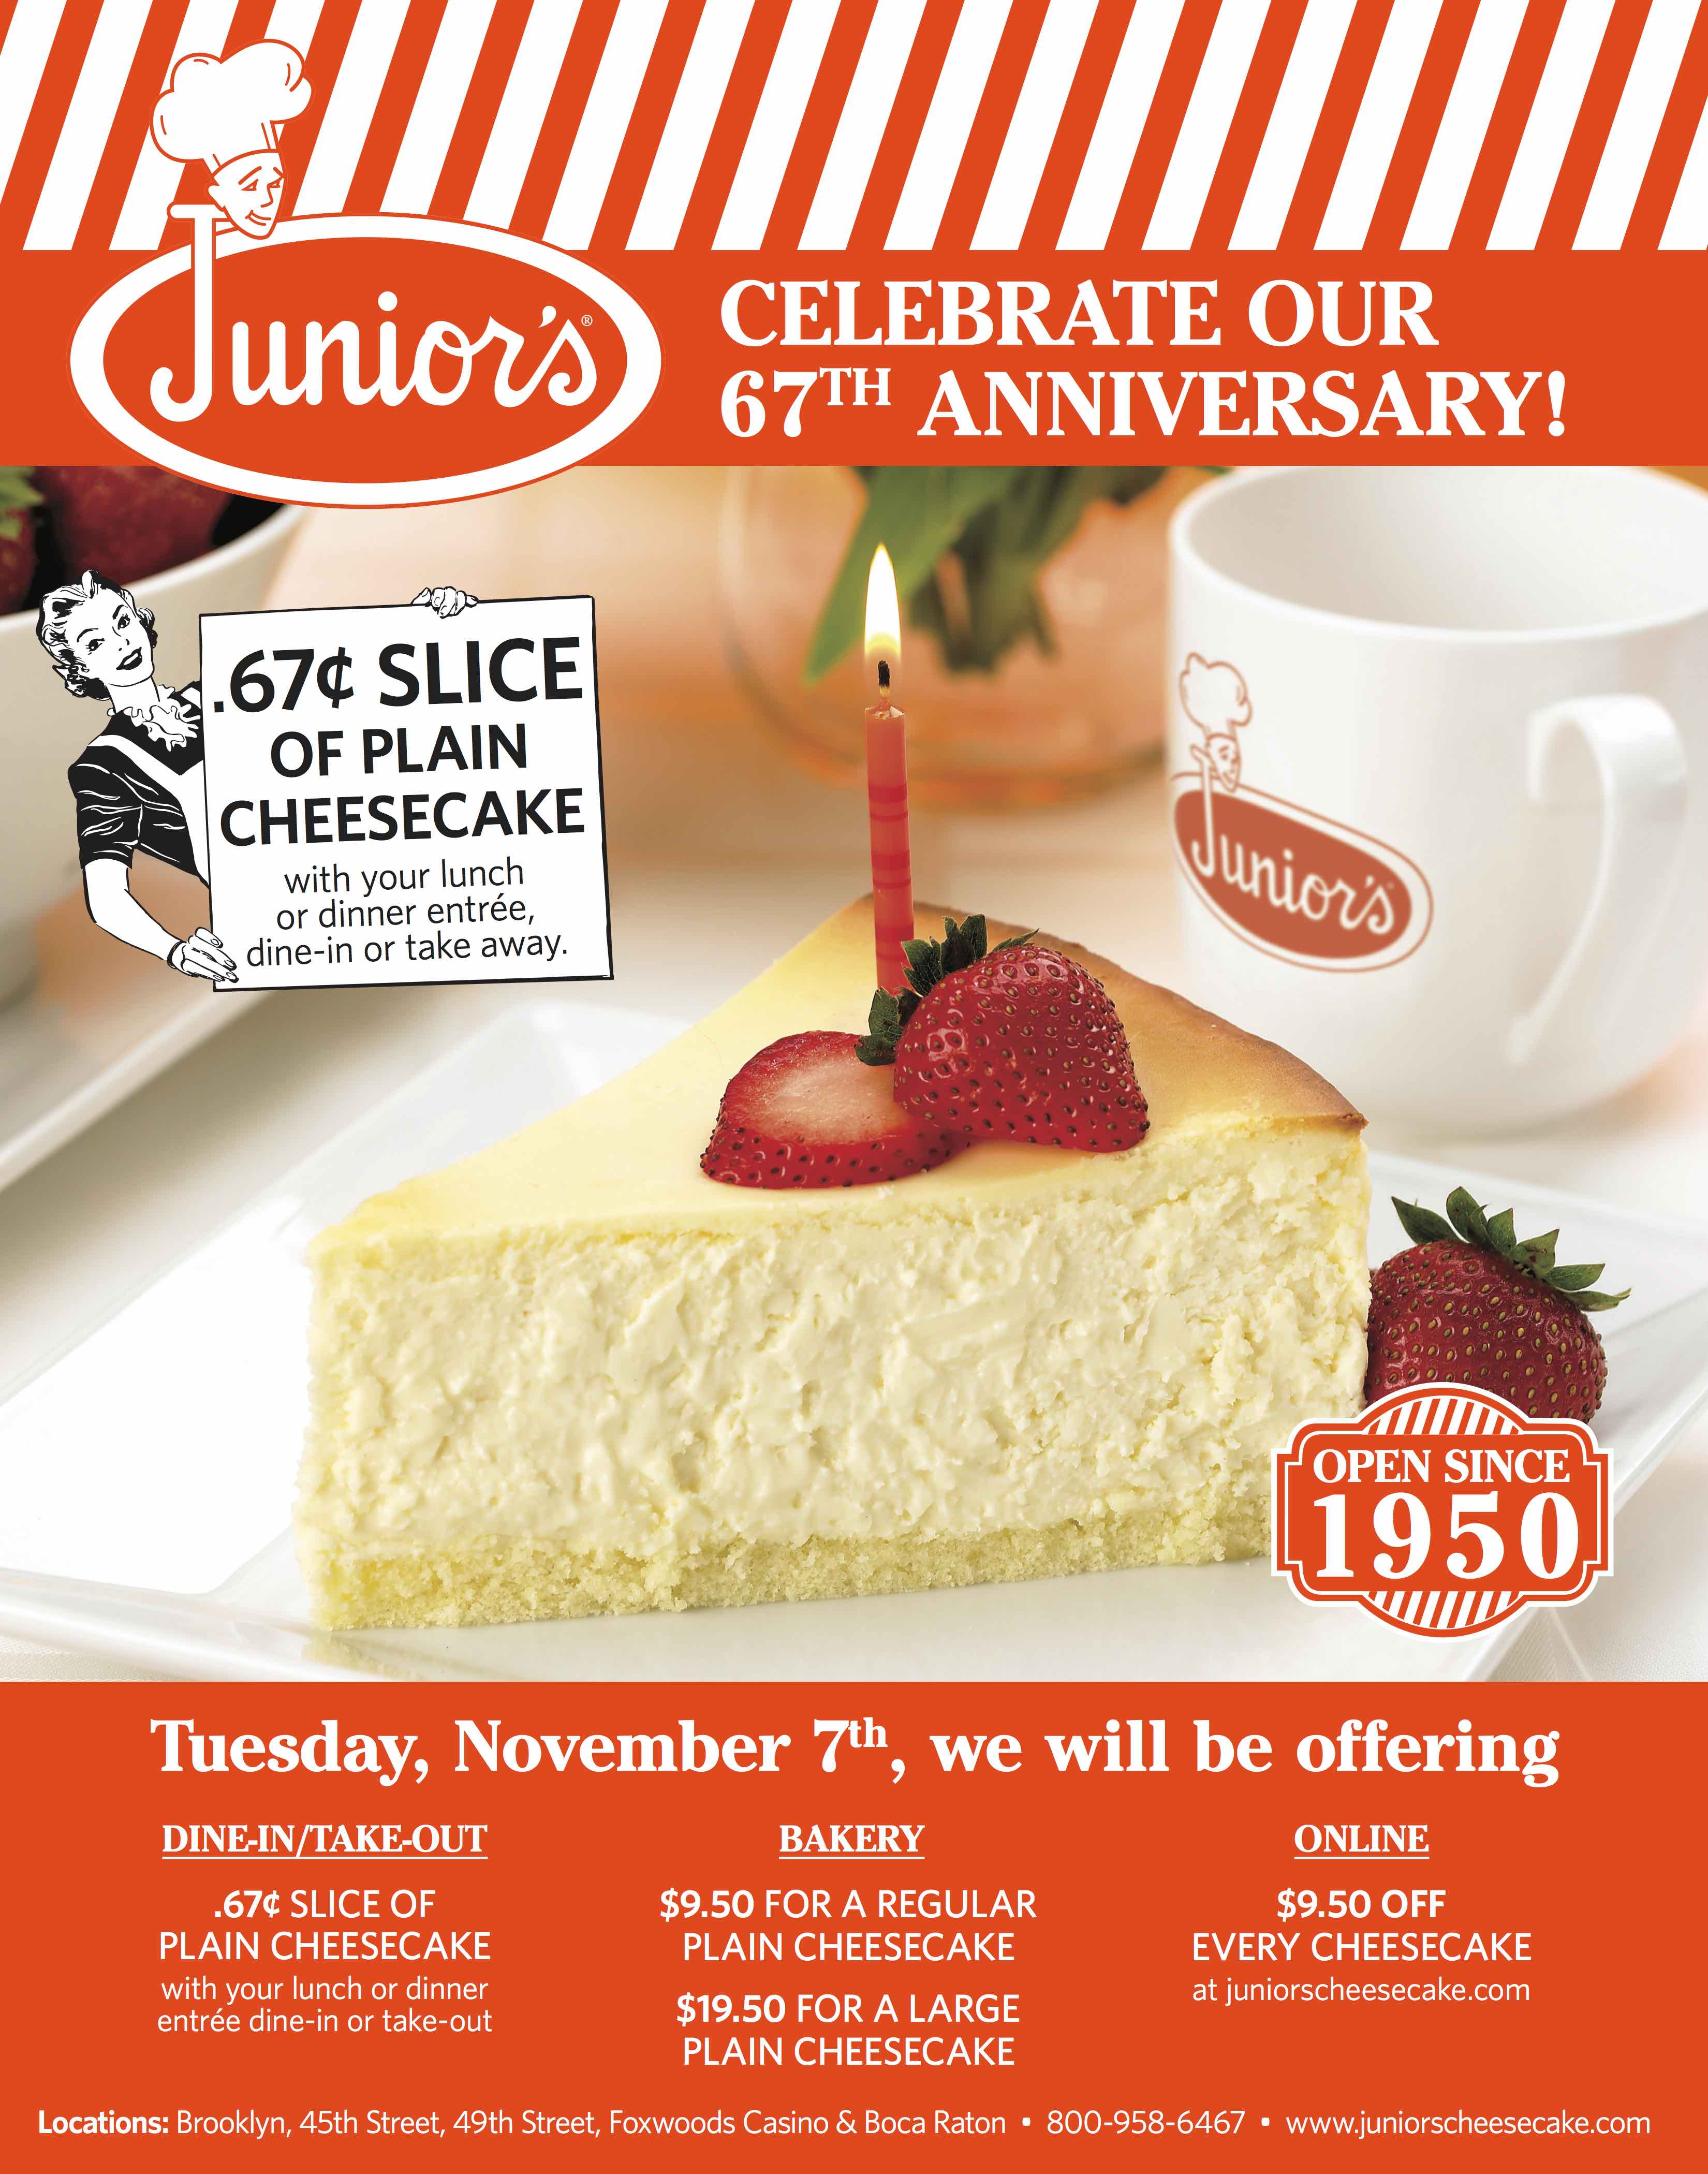 Get Ready to Celebrate our Anniversary! Tuesday November 7th!